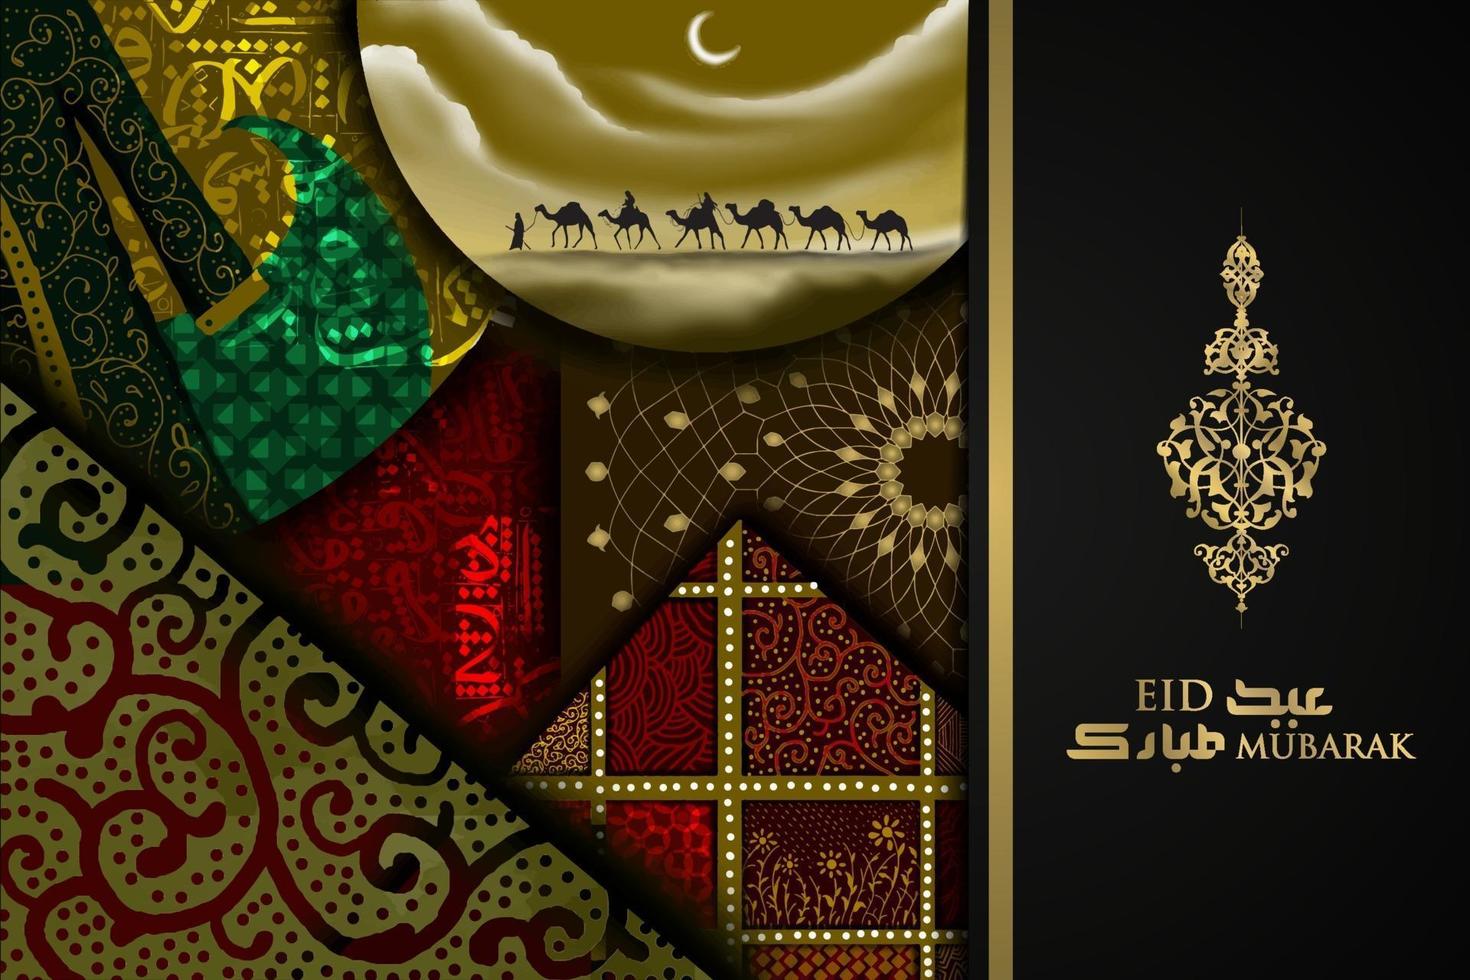 Eid Mubarak Greeting background Islamic pattern vector design with beautiful arabic calligraphy. Translation of text Blessed Festival